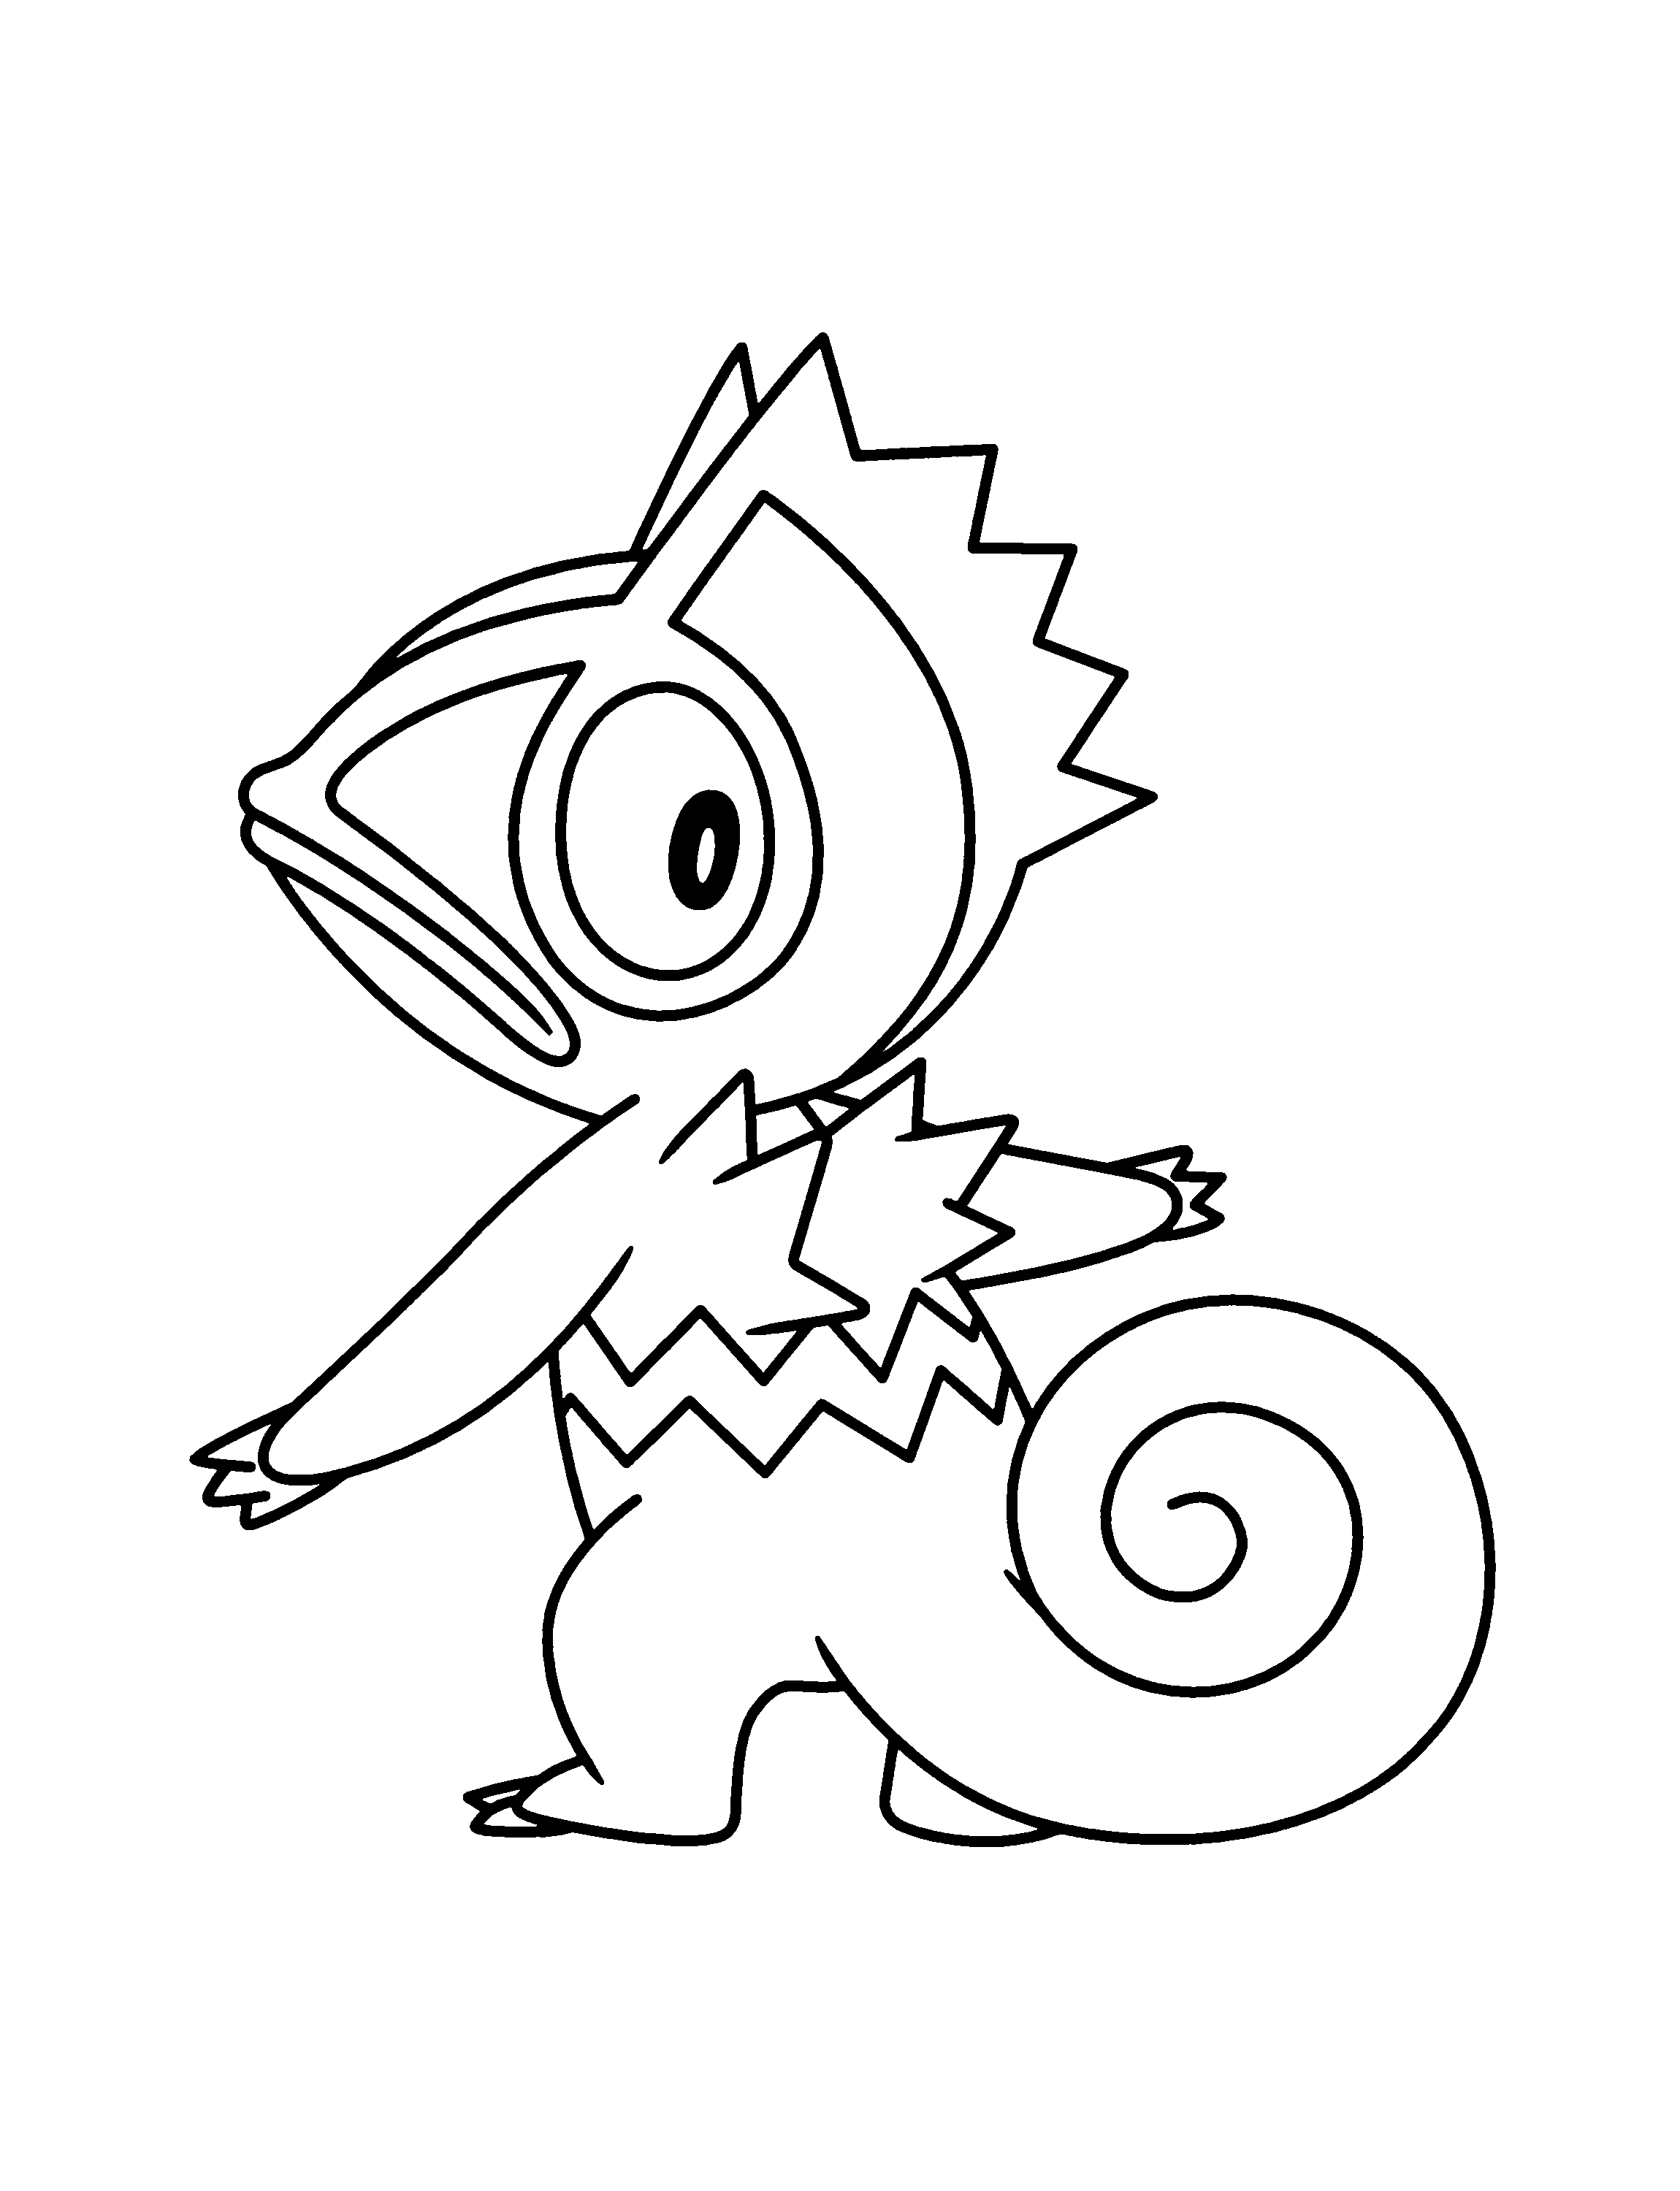 animated-coloring-pages-pokemon-image-0848